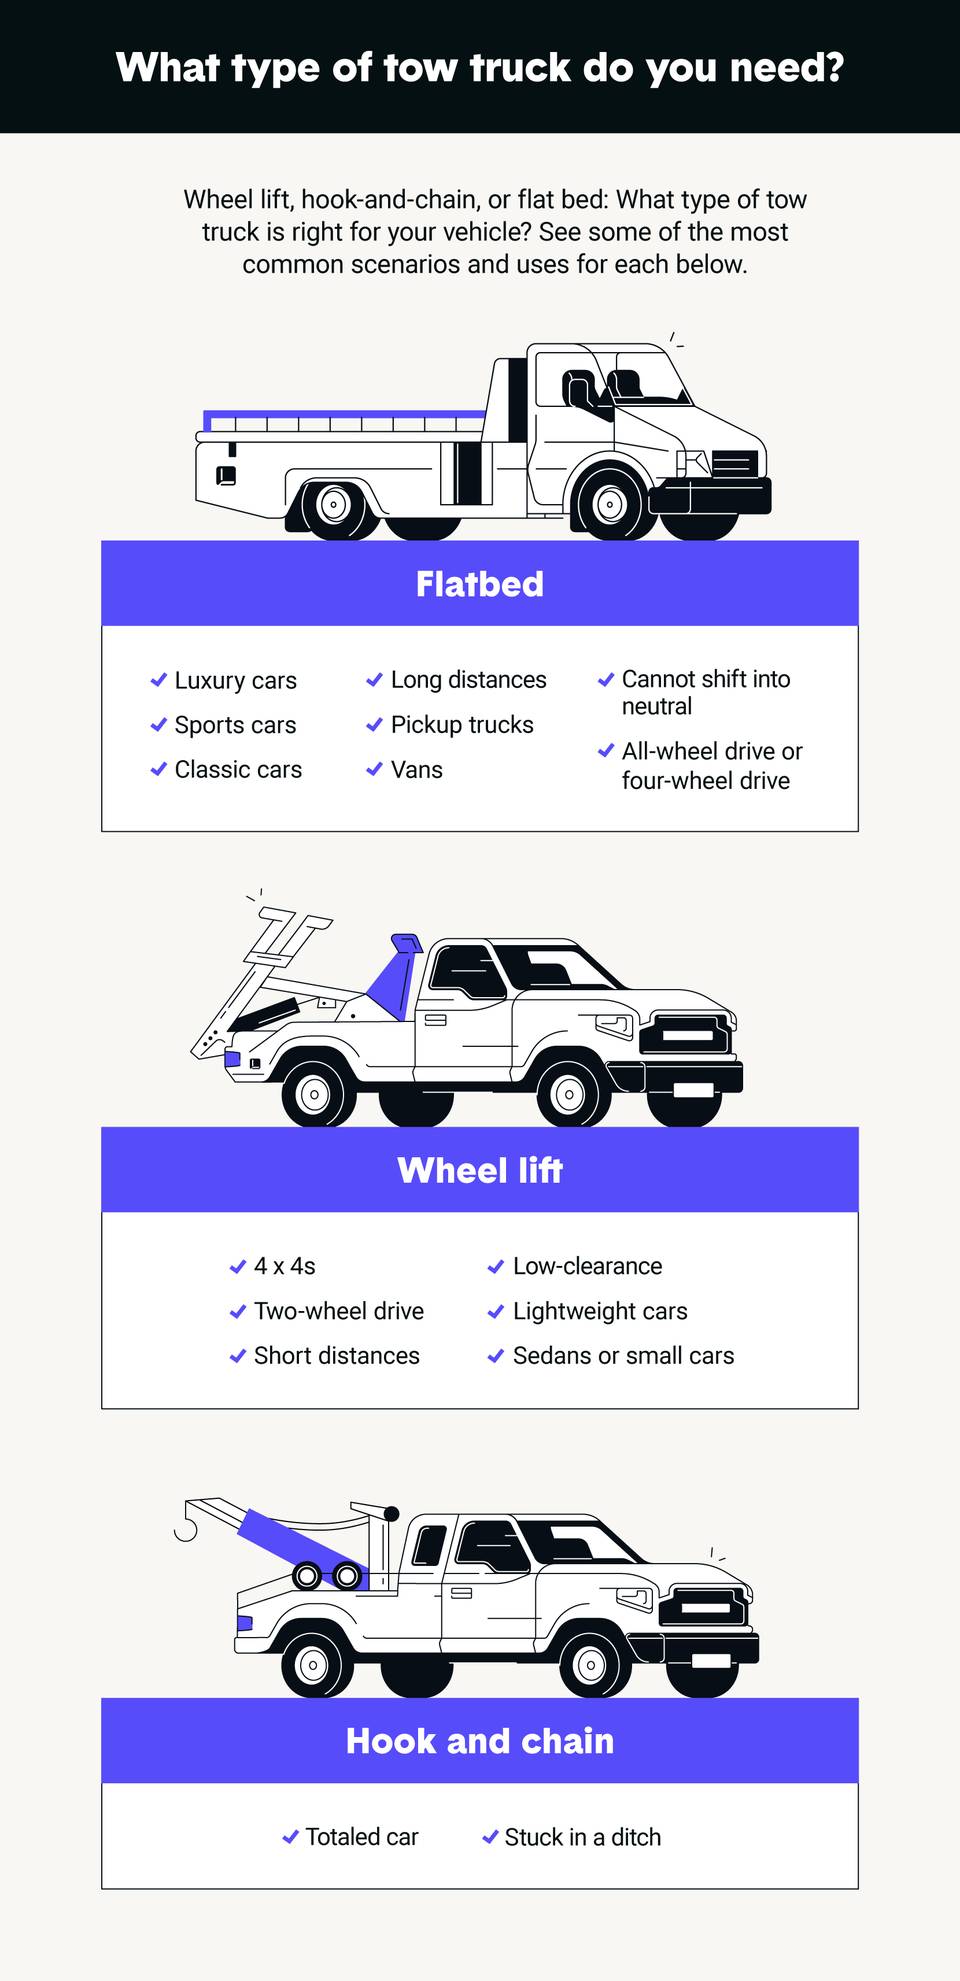 How Much Does Towing a Car Cost?